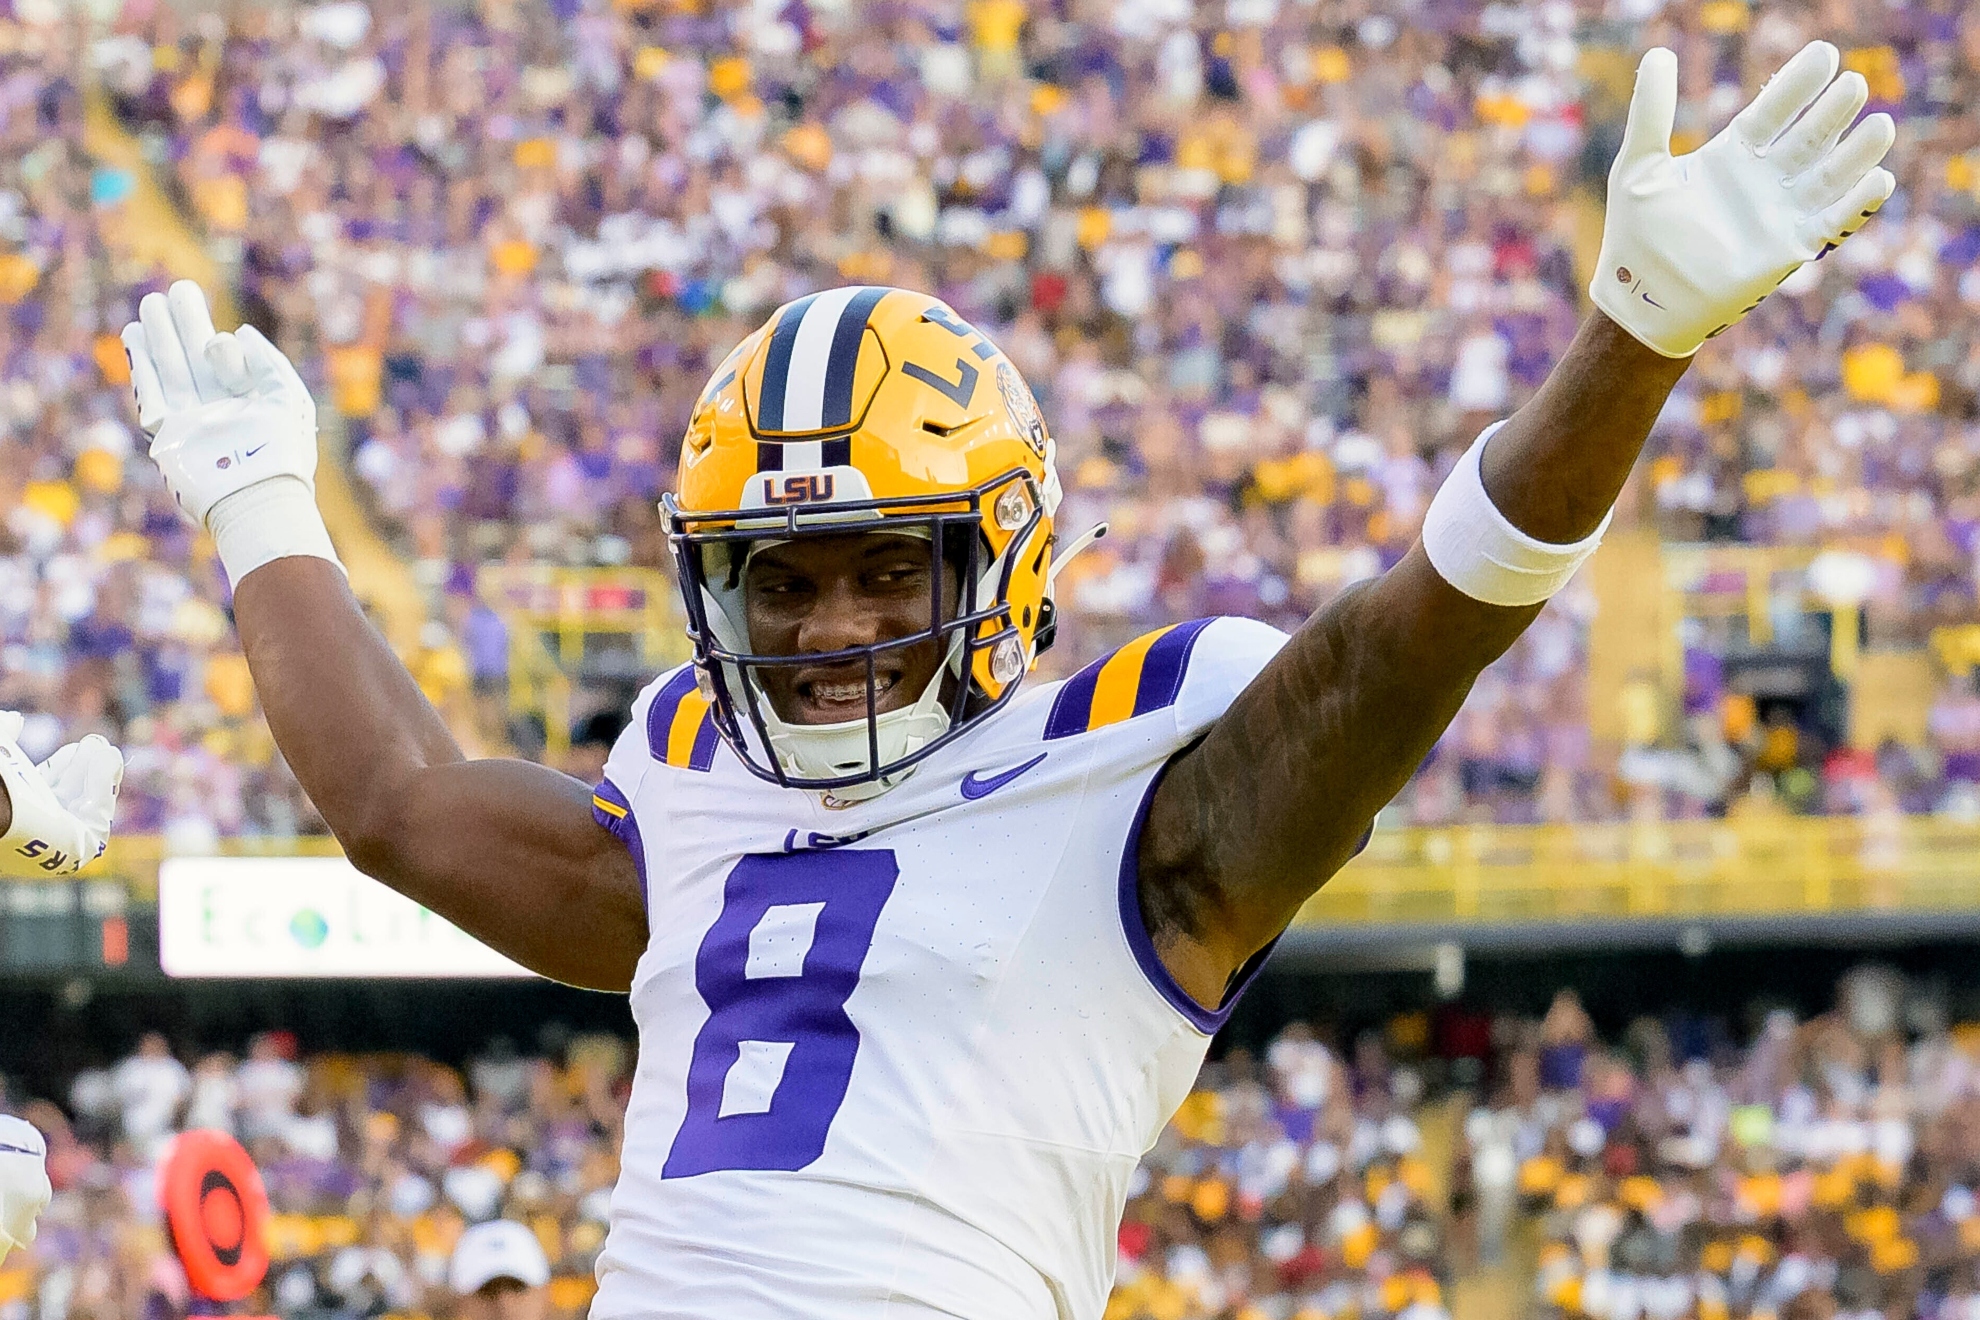 LSU wide receiver Malik Nabers is among the top WR for this years Draft